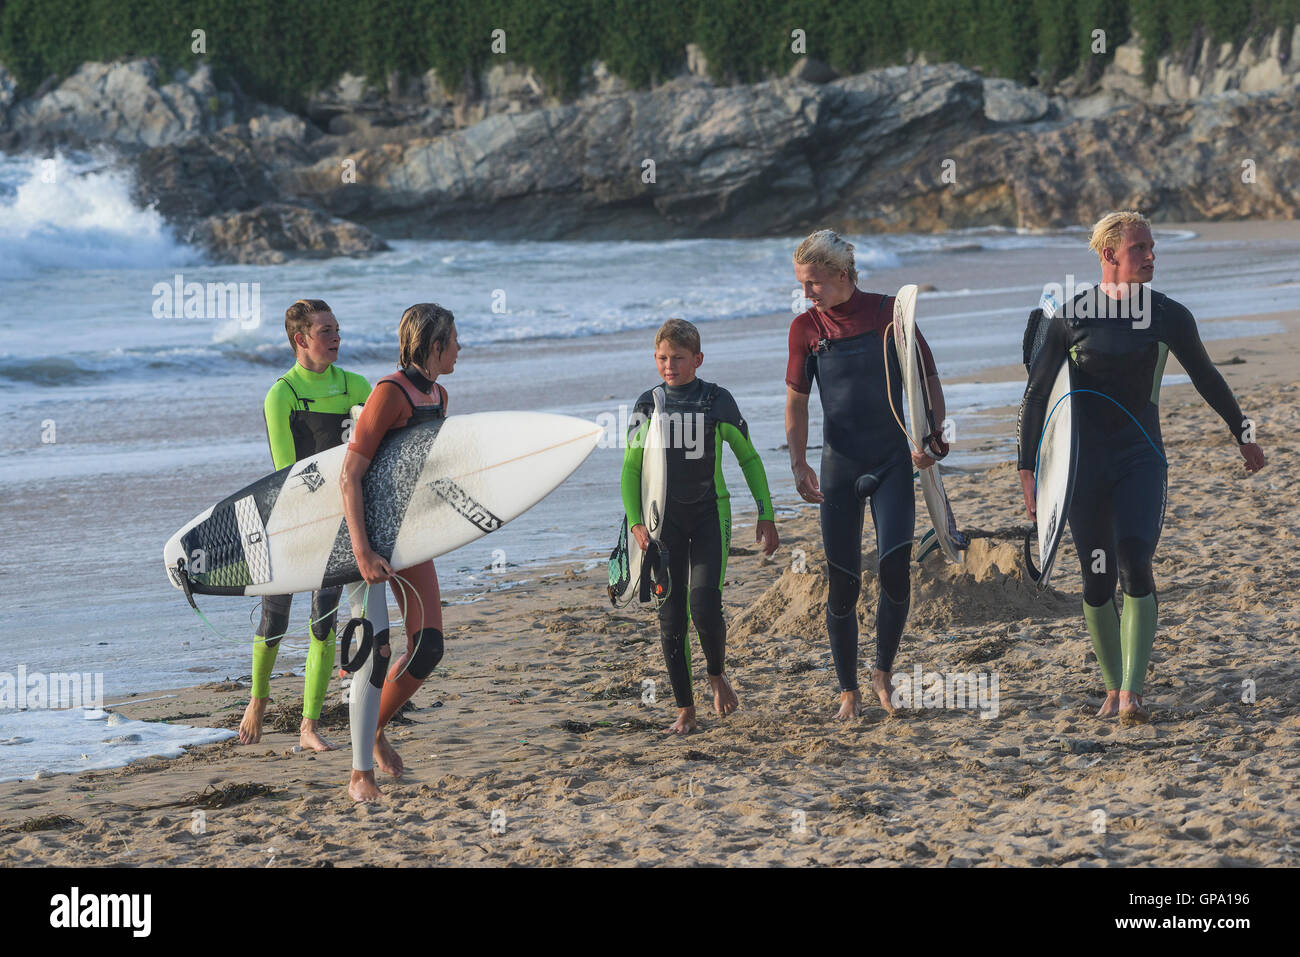 A group of five young Cornish surfers from Newquay finish their surfing session at Fistral in Newquay, Cornwall. UK. Stock Photo